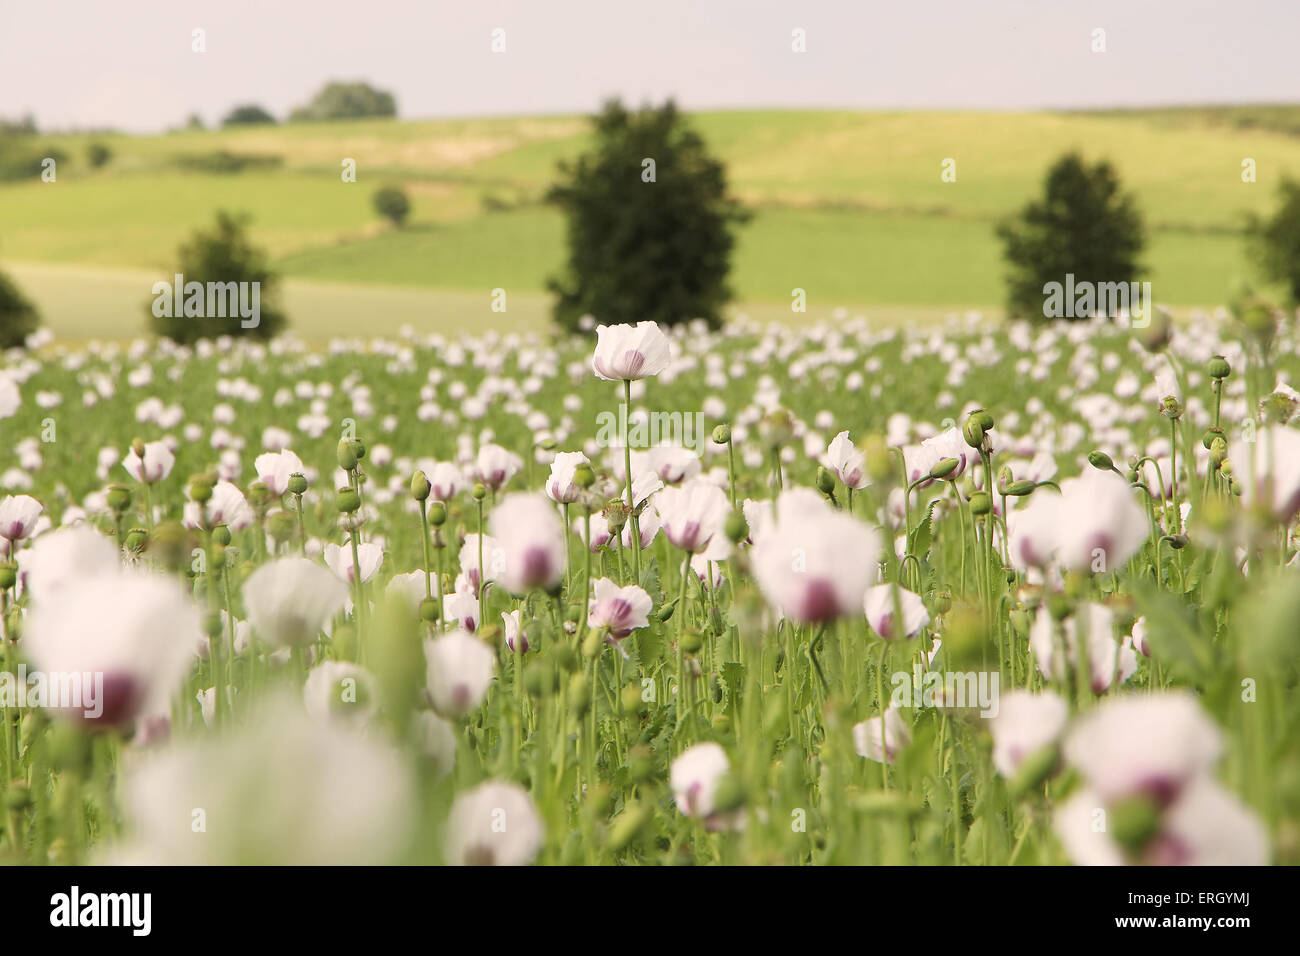 Romantic and tranquil poppy field. Concept of clean and romantic untouched nature. Stock Photo